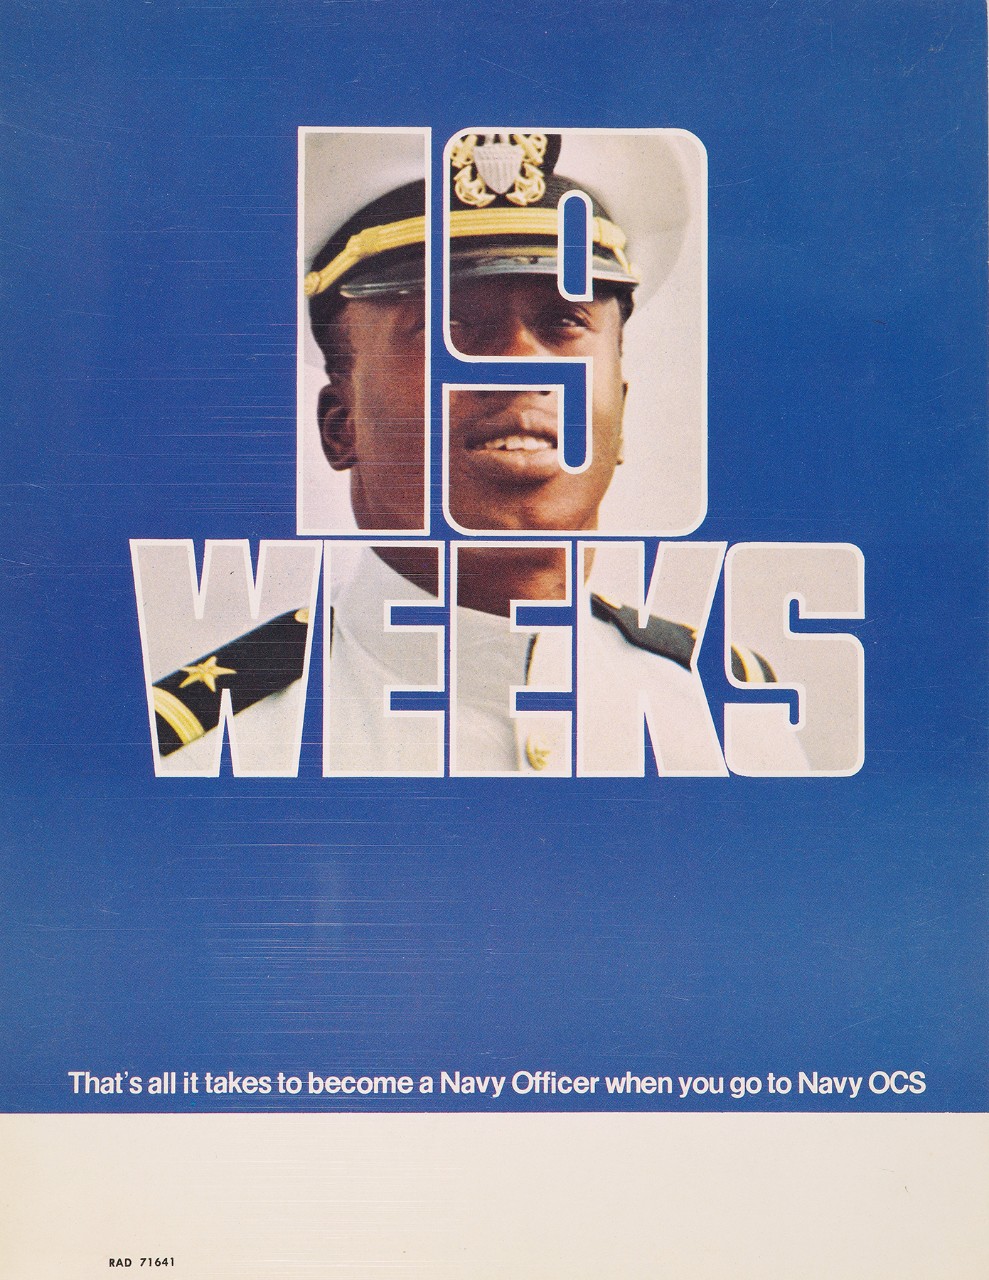 A black naval officer viewed through the lettering "19 Weeks"